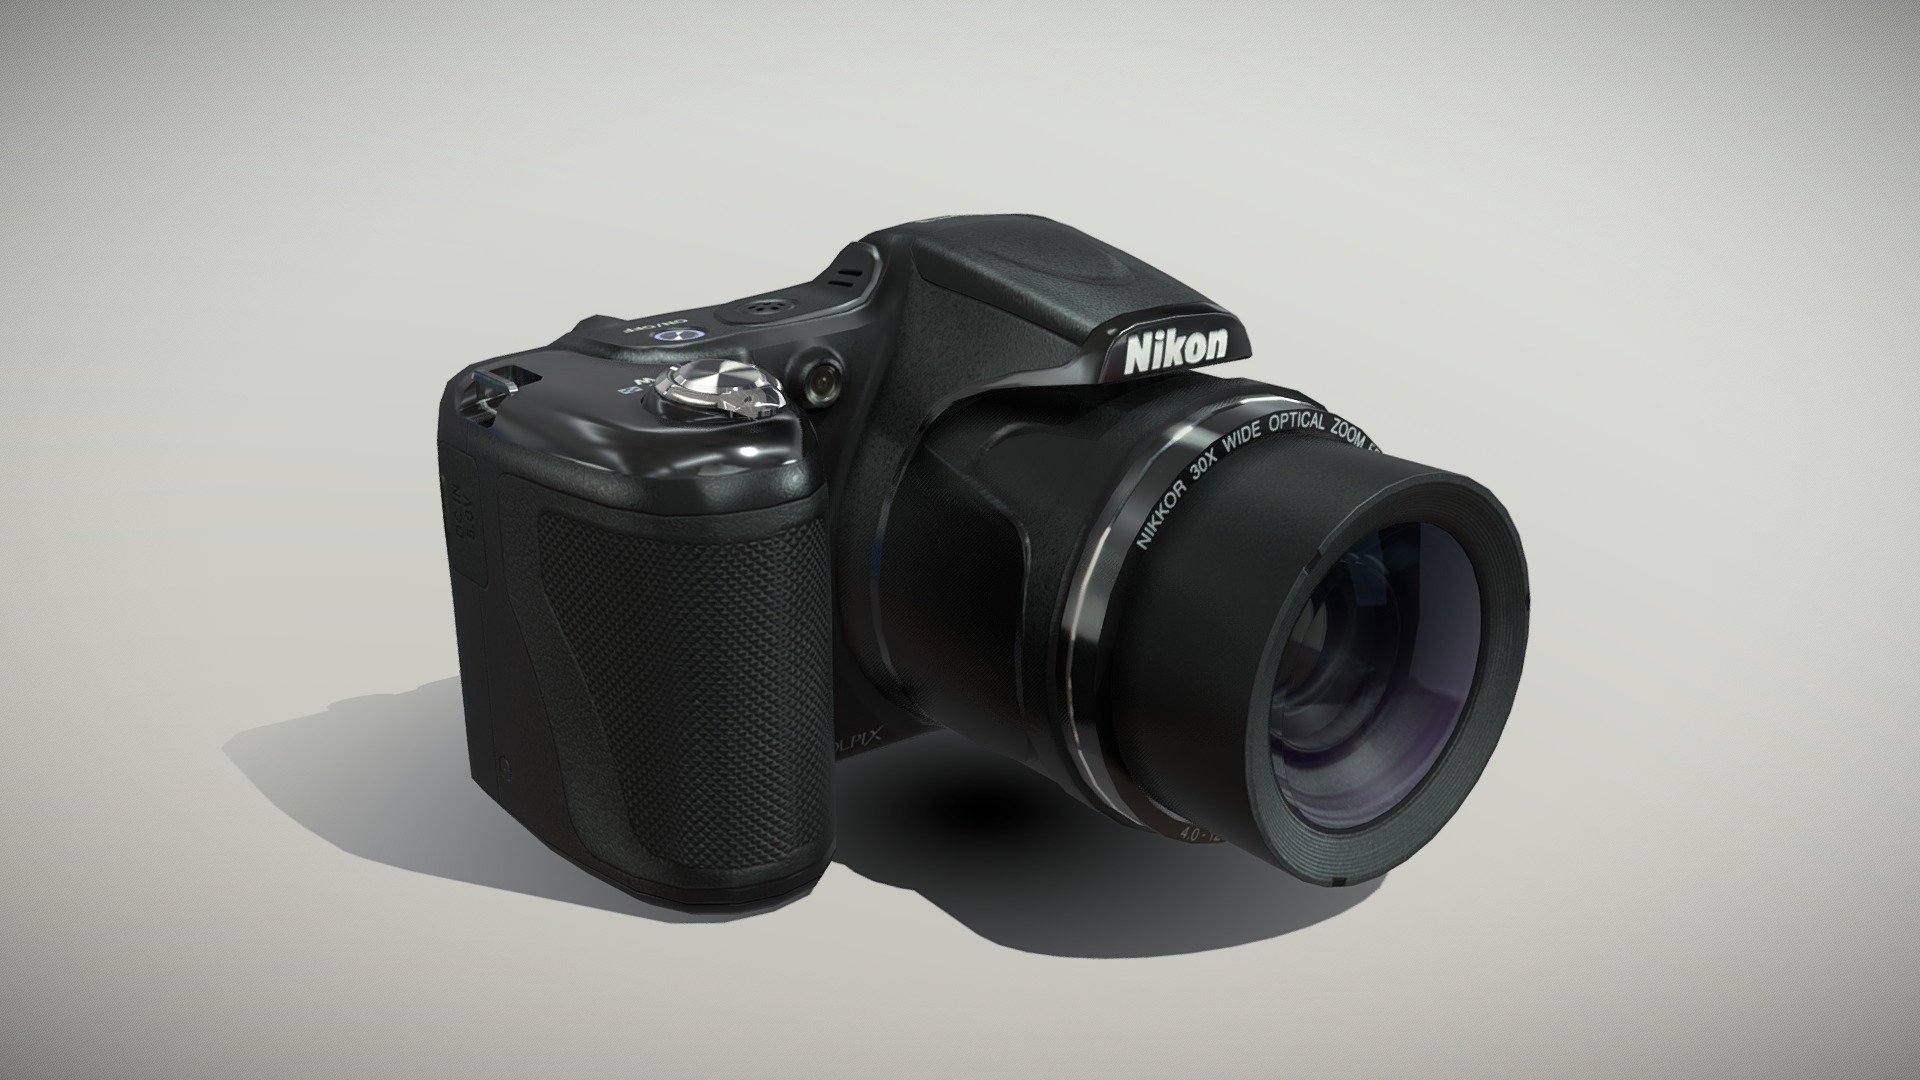 •   Let me present to you high-quality low-poly 3D model Nikon Coolpix L820 Black. Modeling was made with ortho-photos of real camera that is why all details of design are recreated most authentically.

•    This model consists of a few meshes, it is low-polygonal and it has two materials (Body and Glass of Lens).

•   The total of the main textures is 5. Resolution of all textures is 4096 pixels square aspect ratio in .png format. Also there is original texture file .PSD format in separate archive.

•   Polygon count of the model is – 4608.

•   The model has correct dimensions in real-world scale. All parts grouped and named correctly.

•   To use the model in other 3D programs there are scenes saved in formats .fbx, .obj, .DAE, .max (2010 version).

Note: If you see some artifacts on the textures, it means compression works in the Viewer. We recommend setting HD quality for textures. But anyway, original textures have no artifacts 3d model